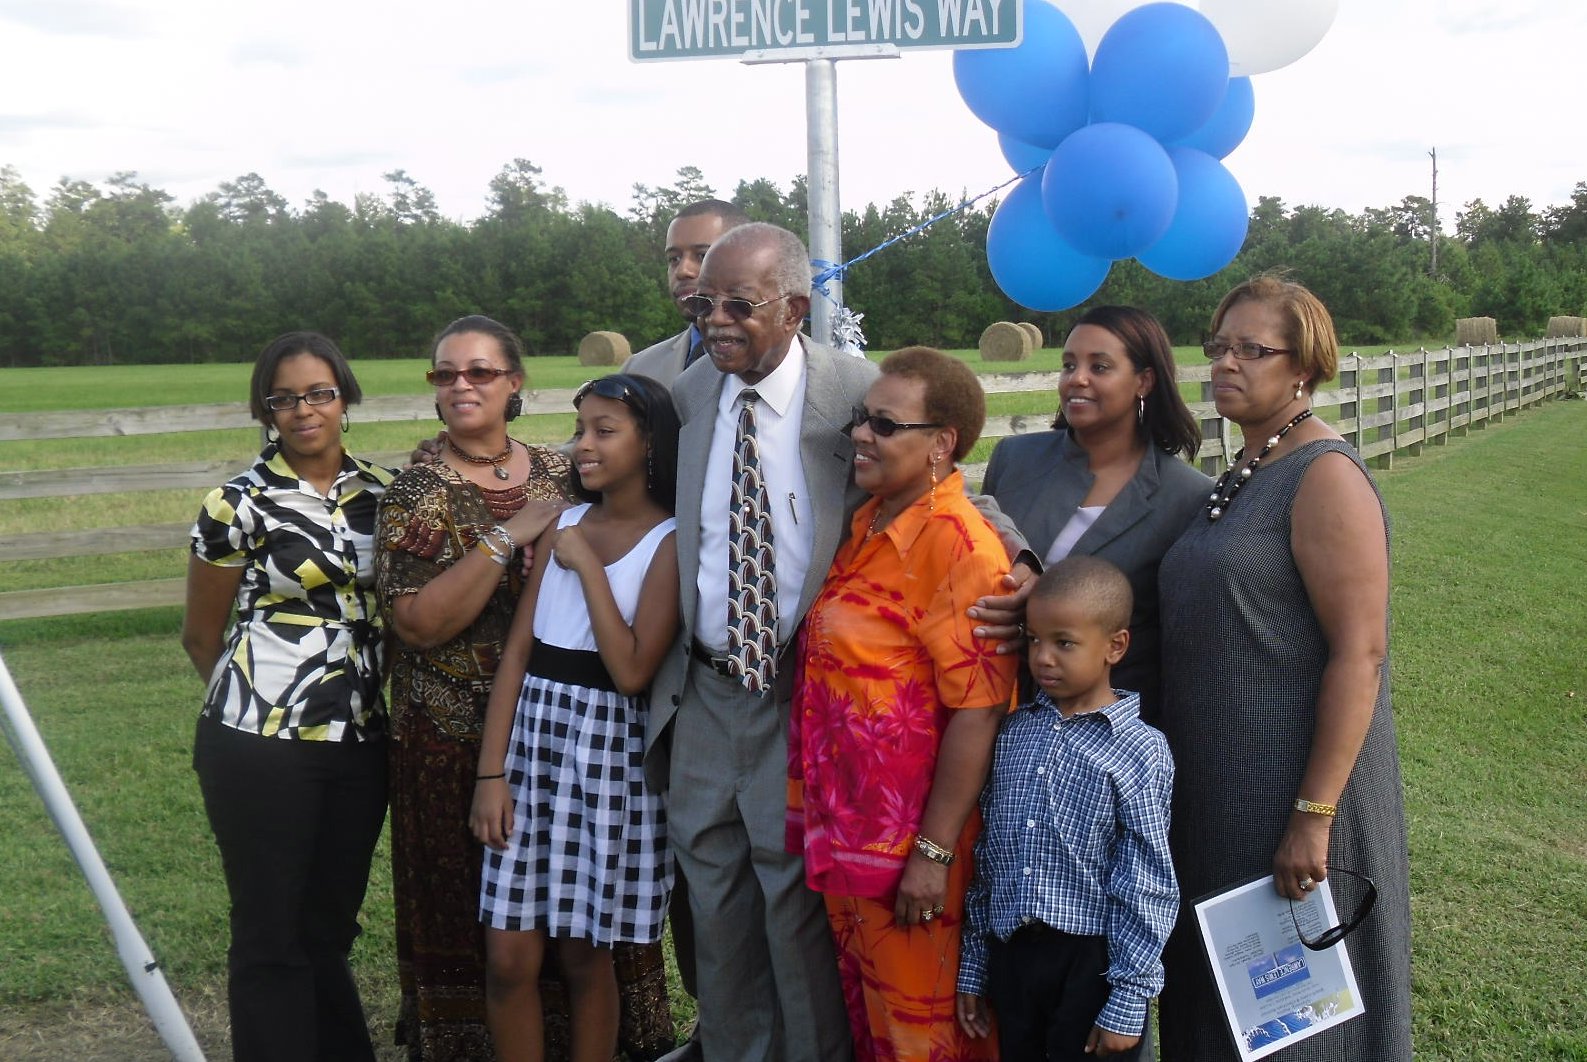 Bishop Lewis and Family